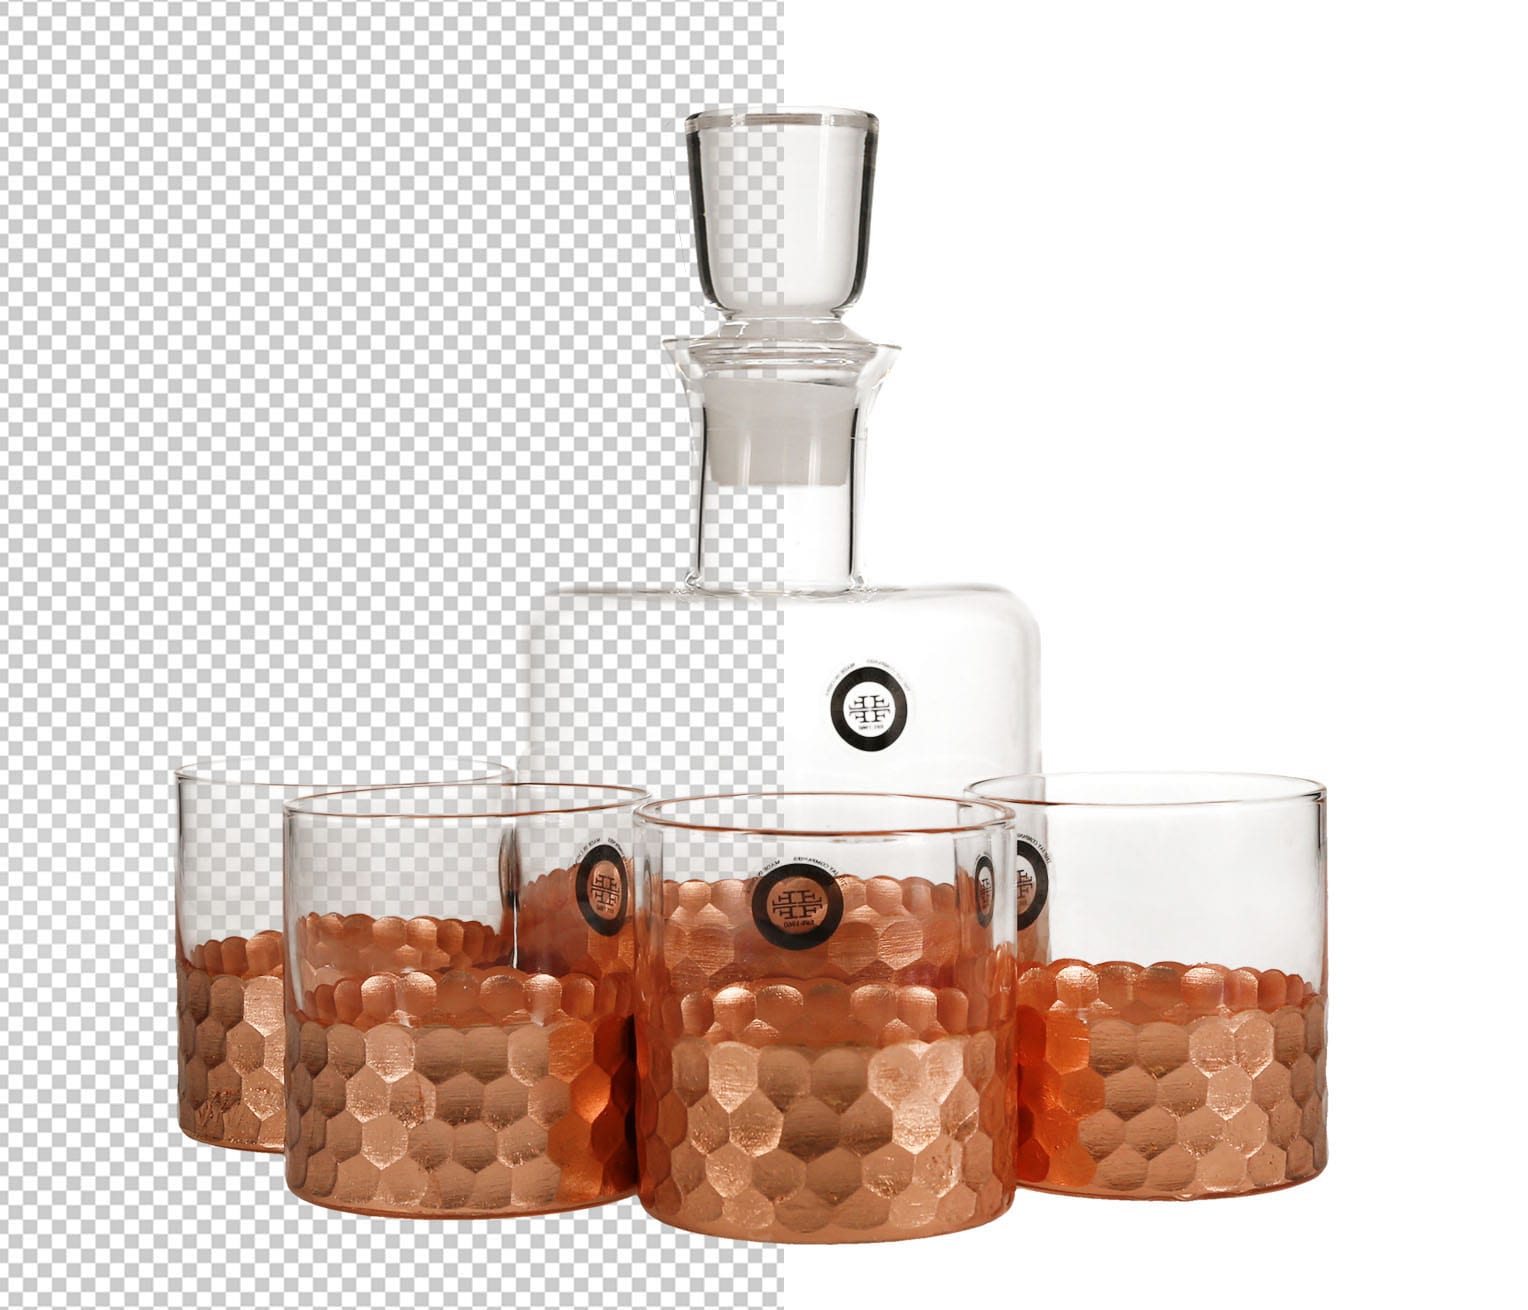 Ortery background removal feature makes it easy to shoot product photos on both a pure white or transparent background